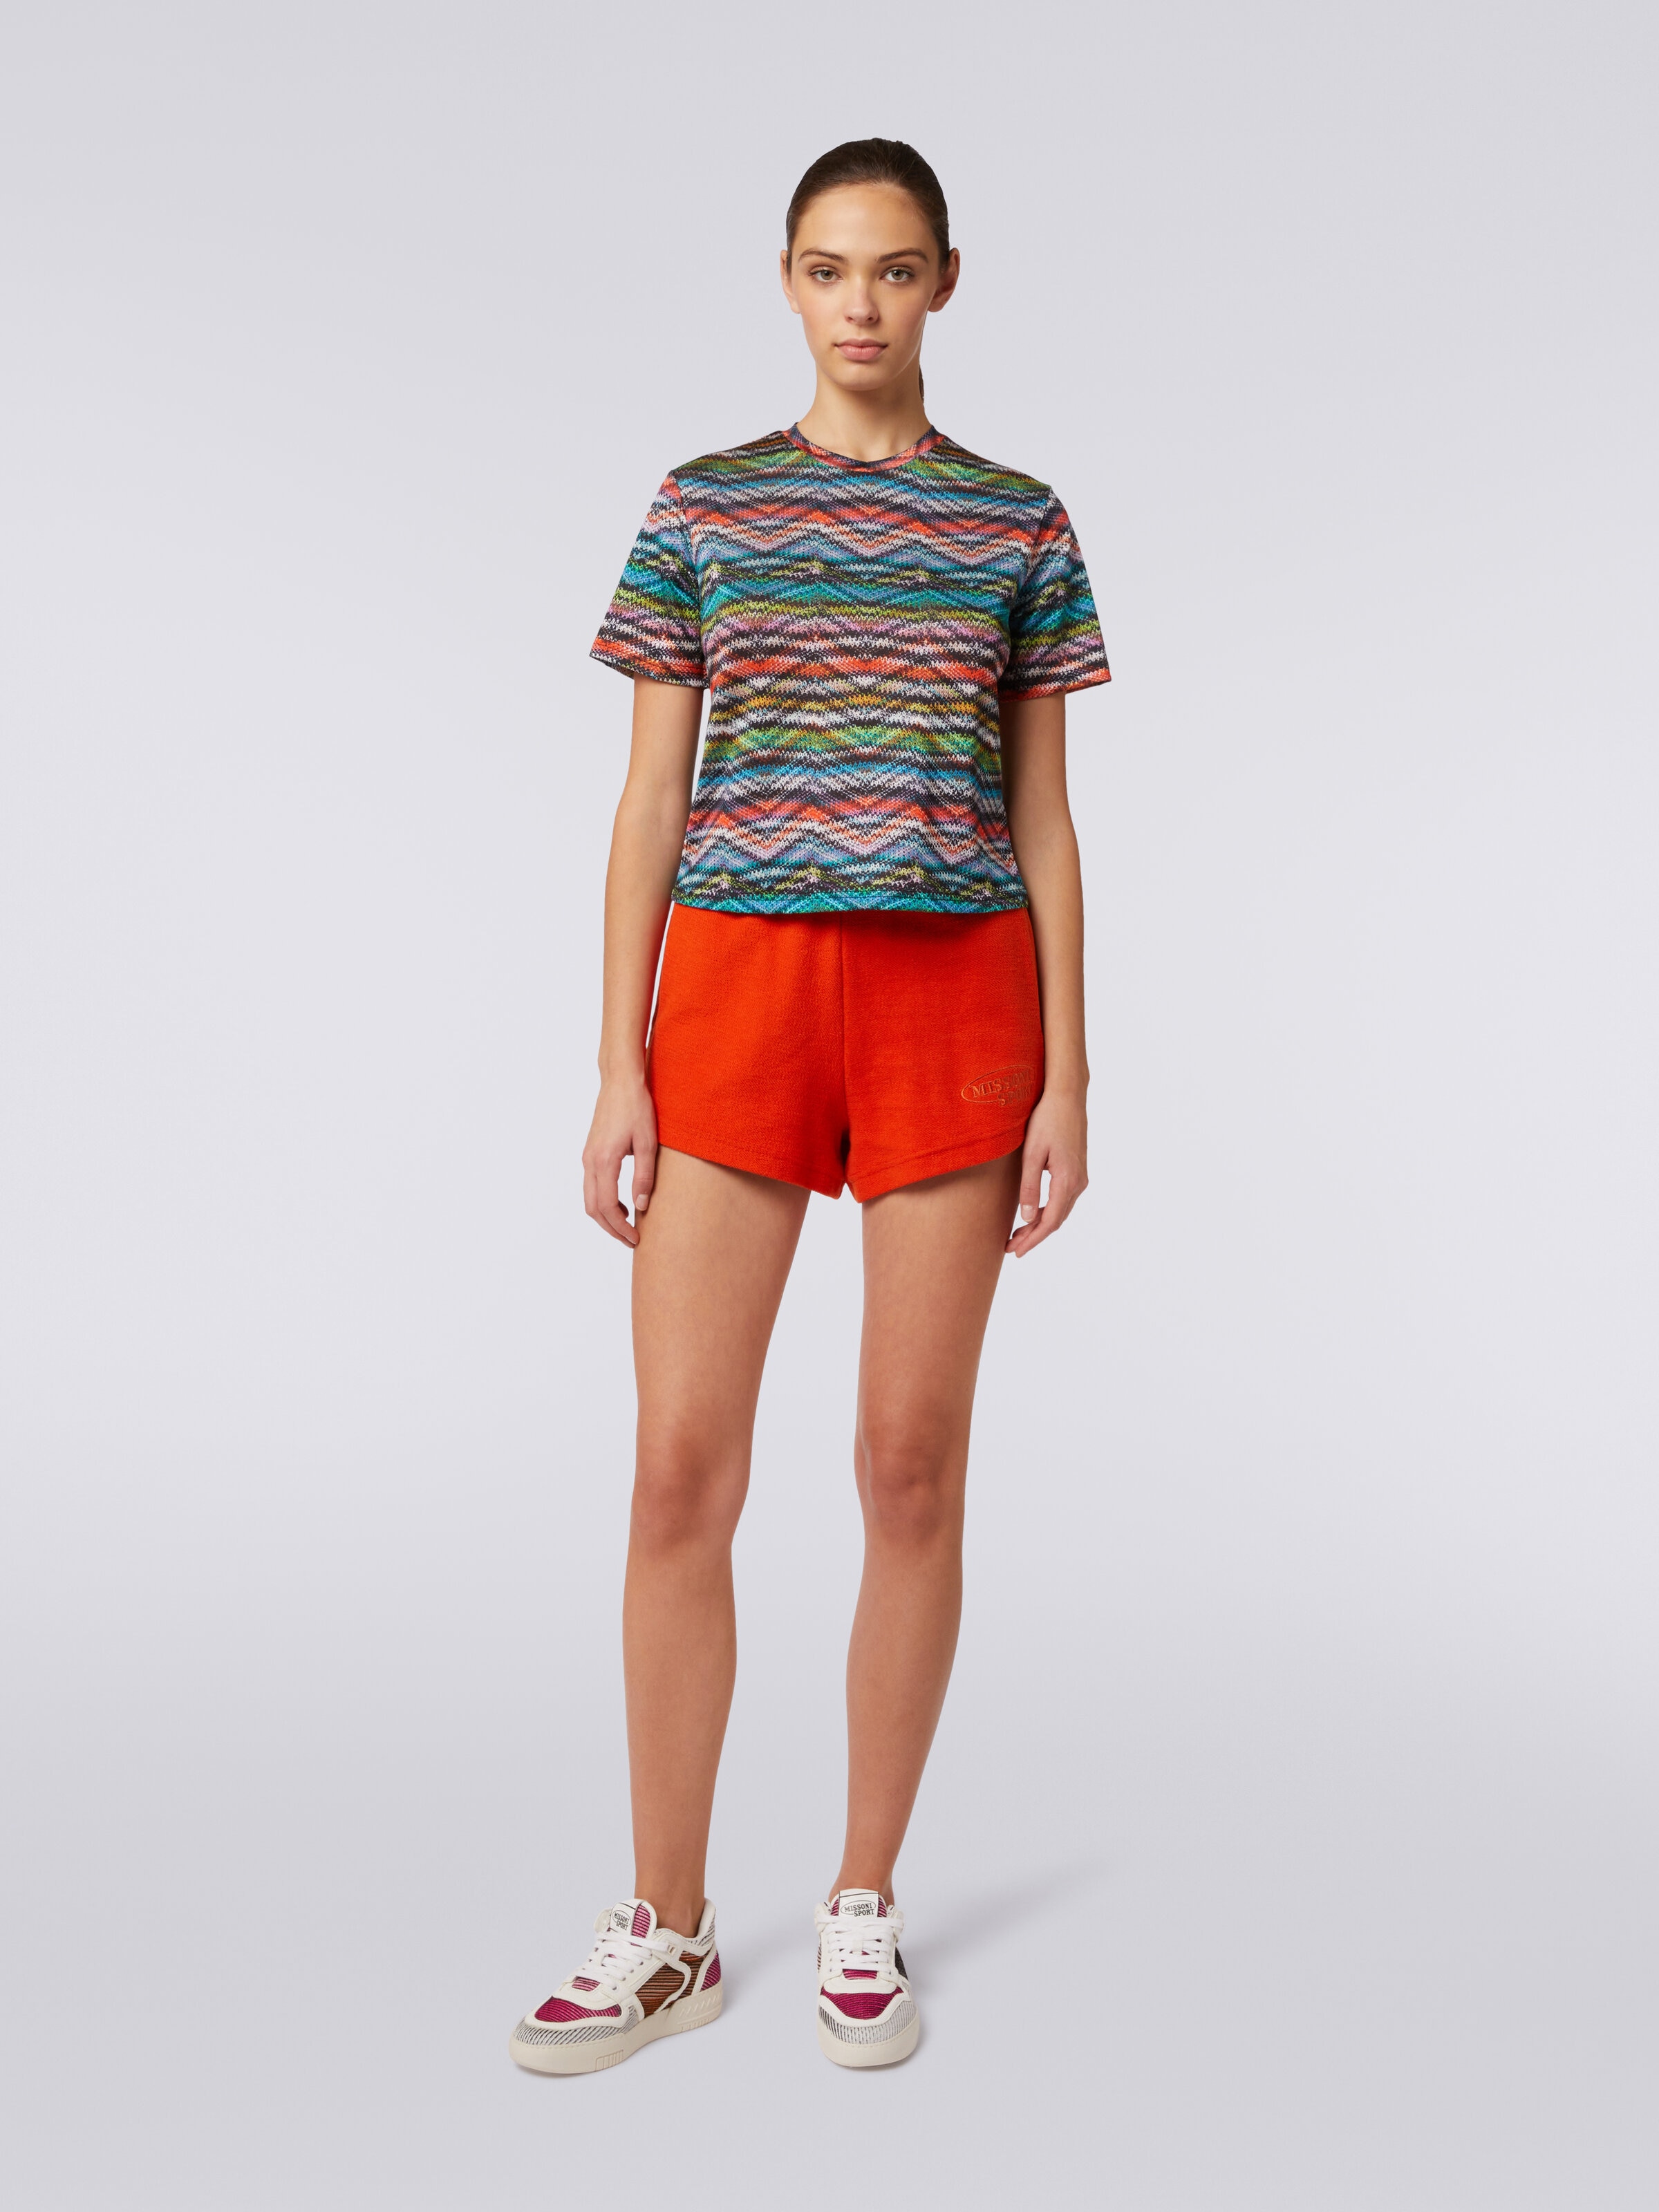 T-shirt in printed stretch nylon, Multicoloured  - 1